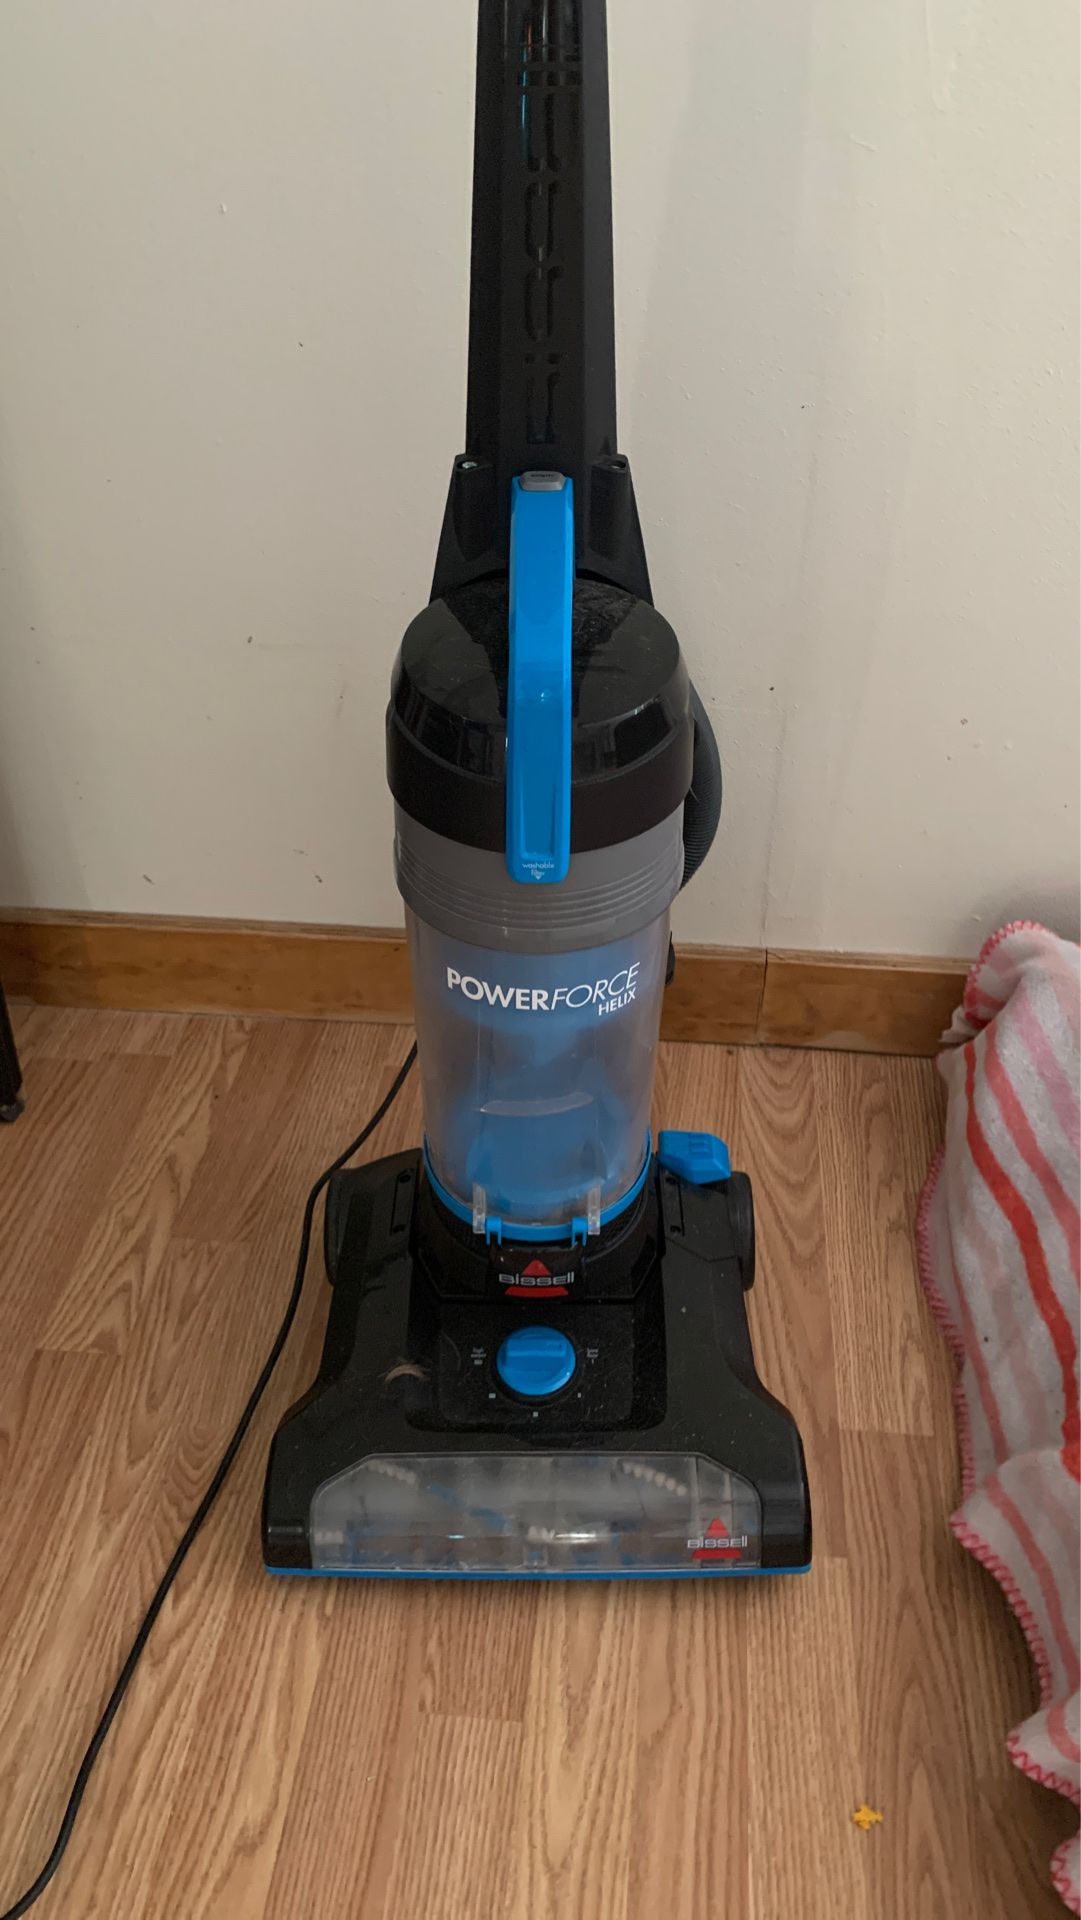 Bissell power force vacuum. Smoke free home.